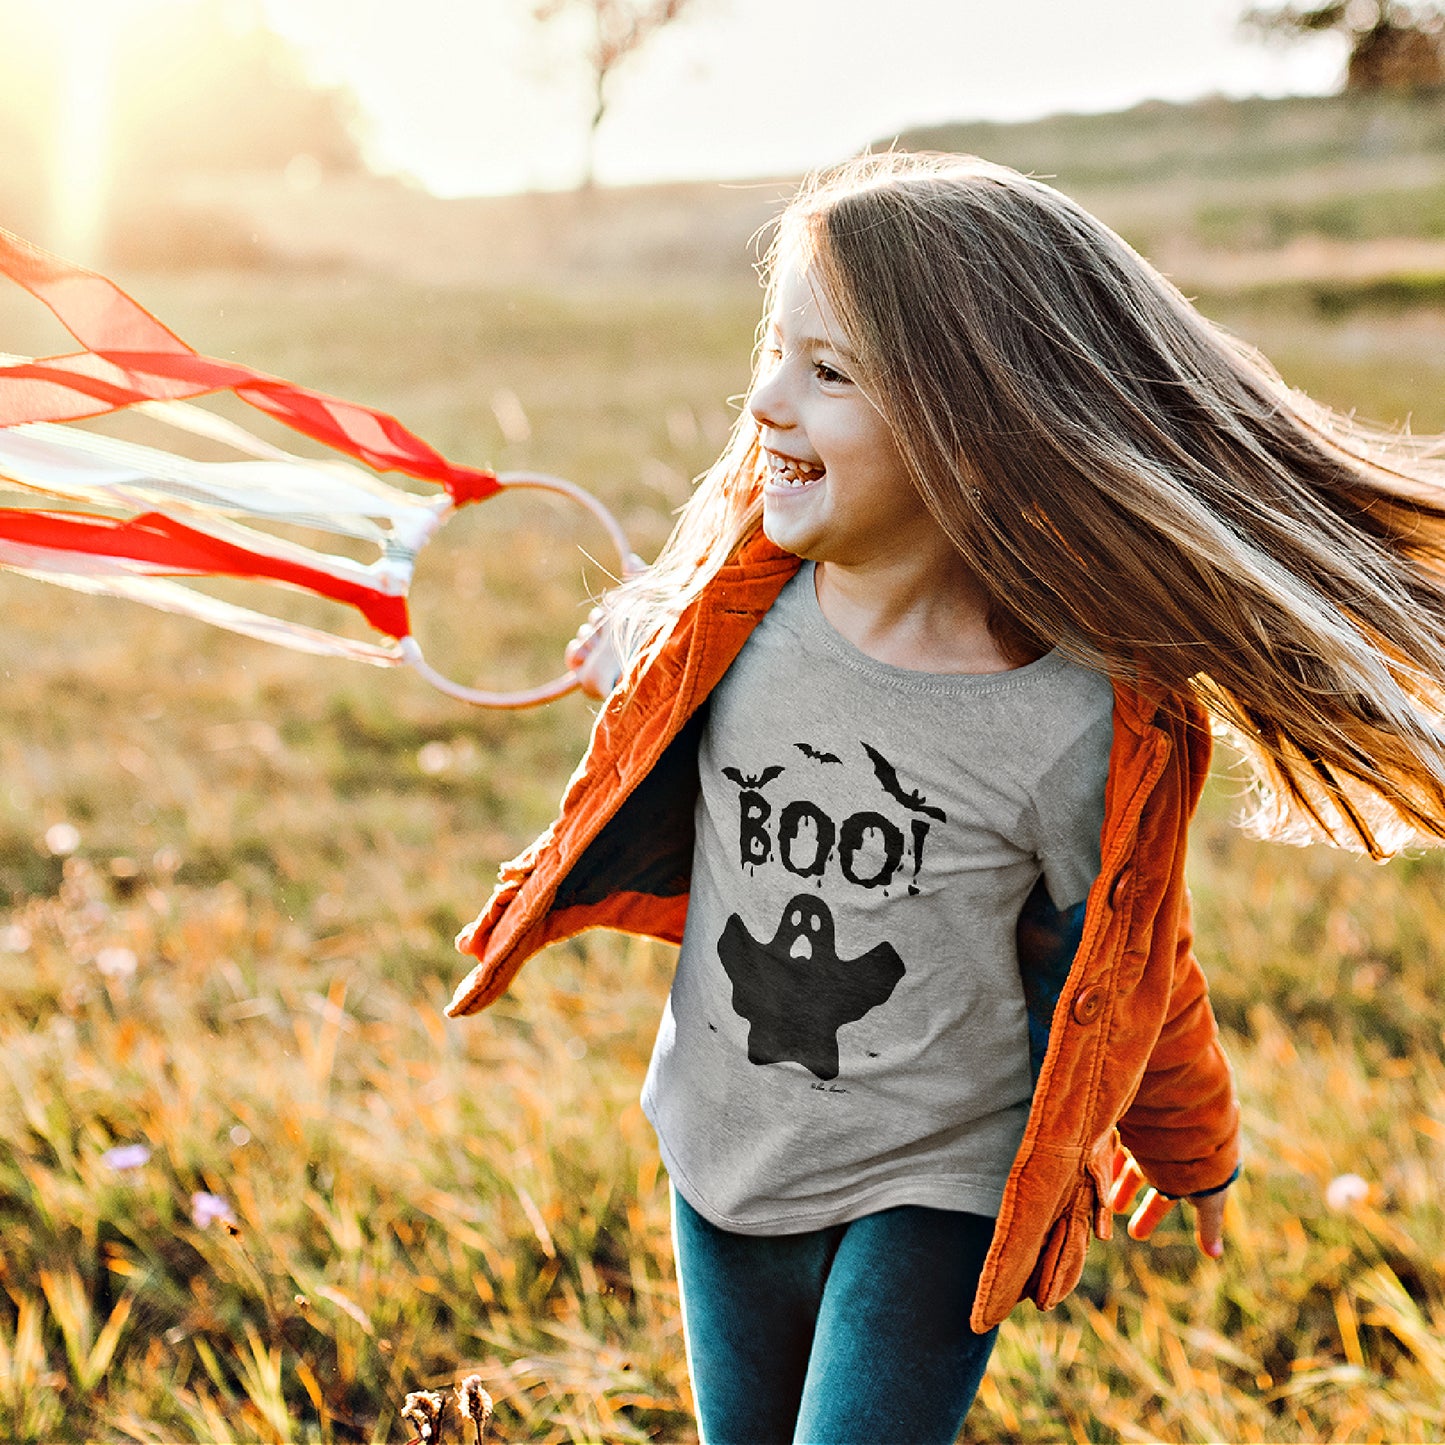 Mock up of a little girl playing in the countrywide while wearing our heather grey Kids Halloween T-shirt 